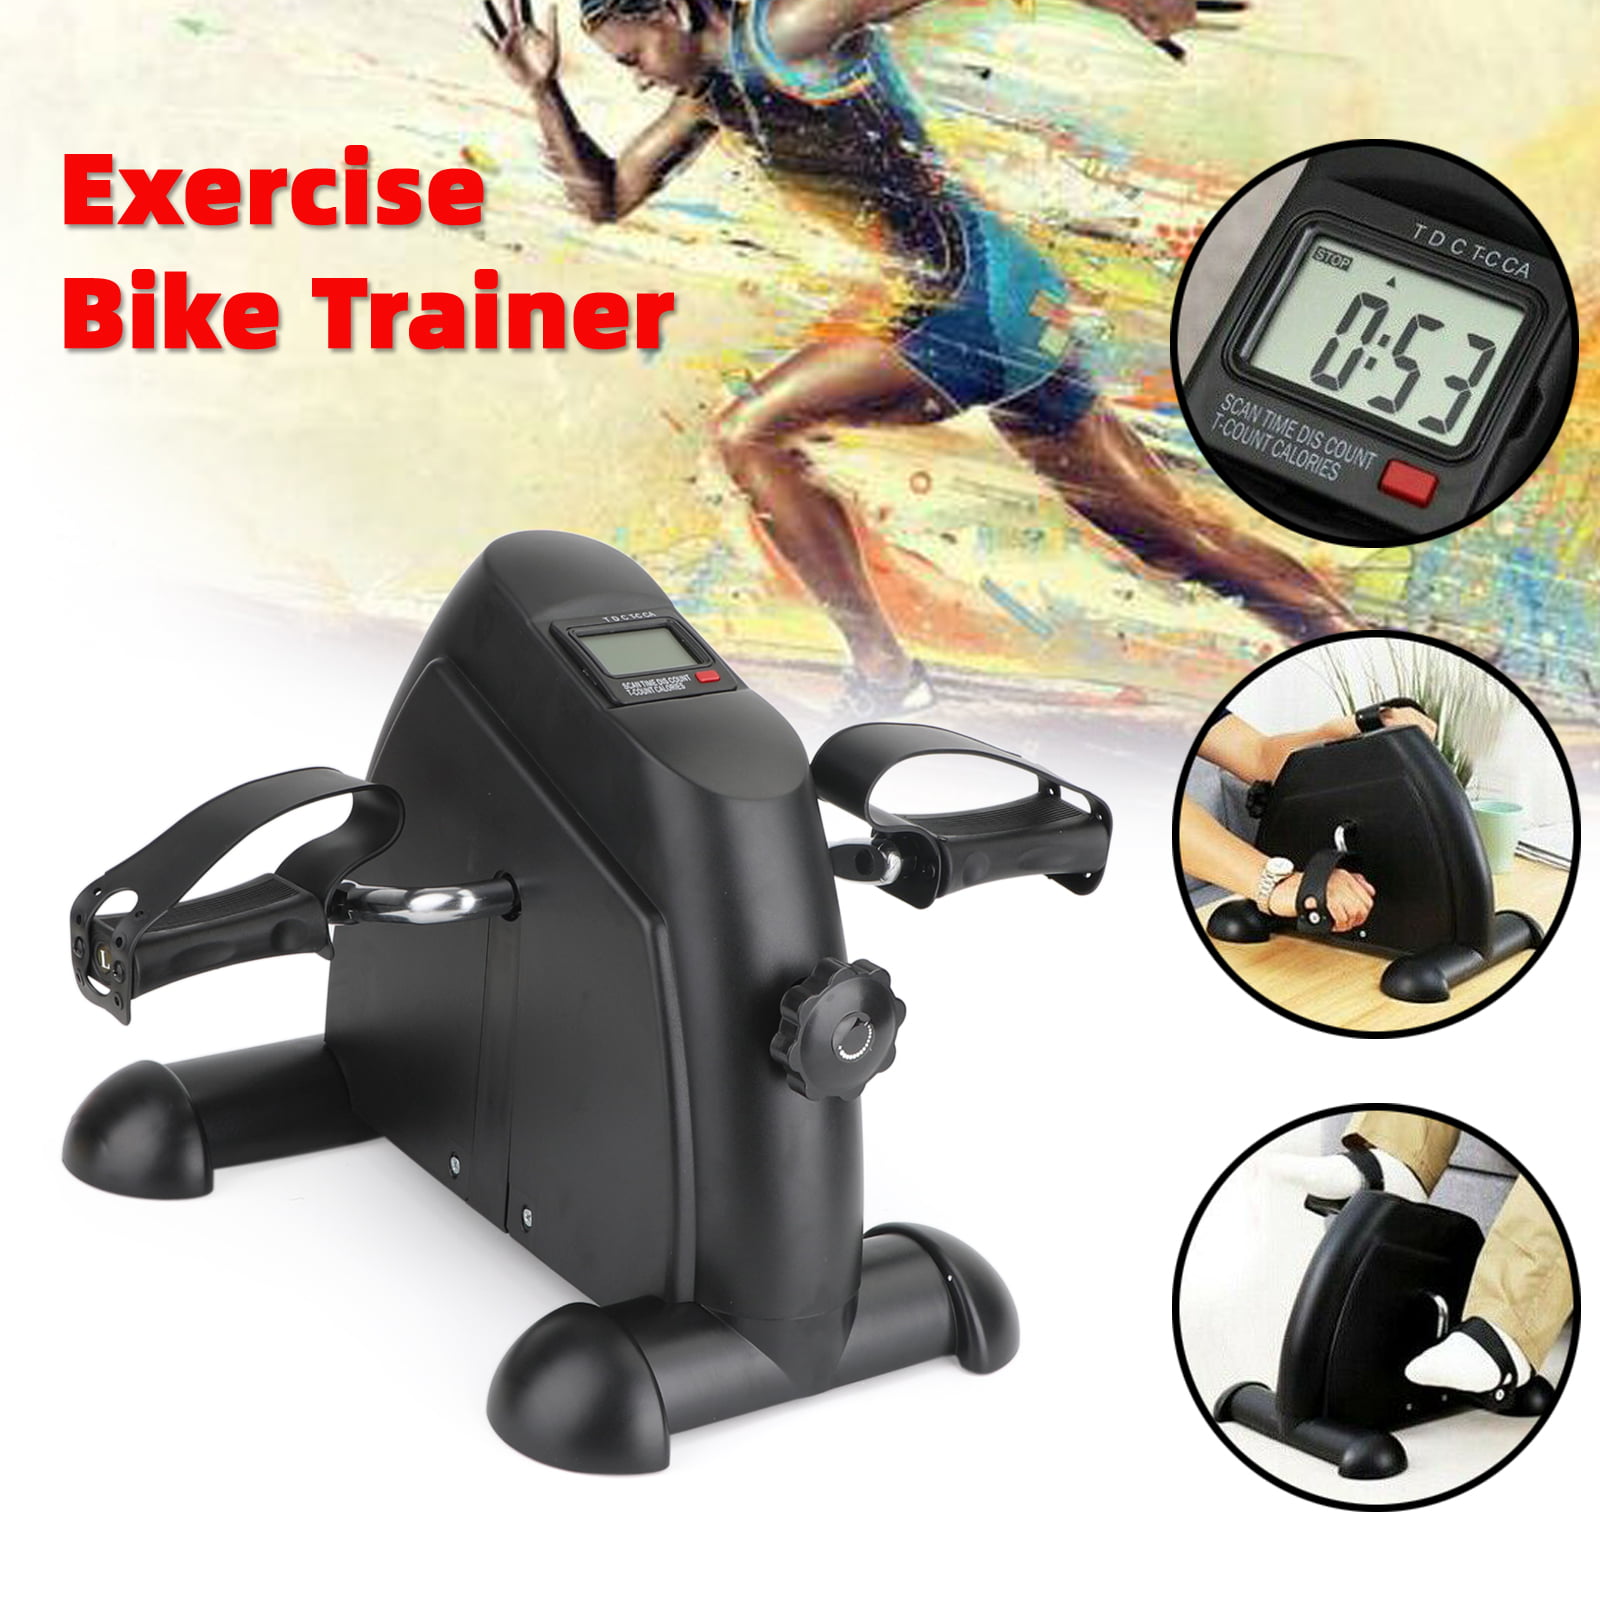 Details about   Home Cardio Mini Stepper Pedal Exercise Bike Cycle Leg Equipment Sports J3Z5 